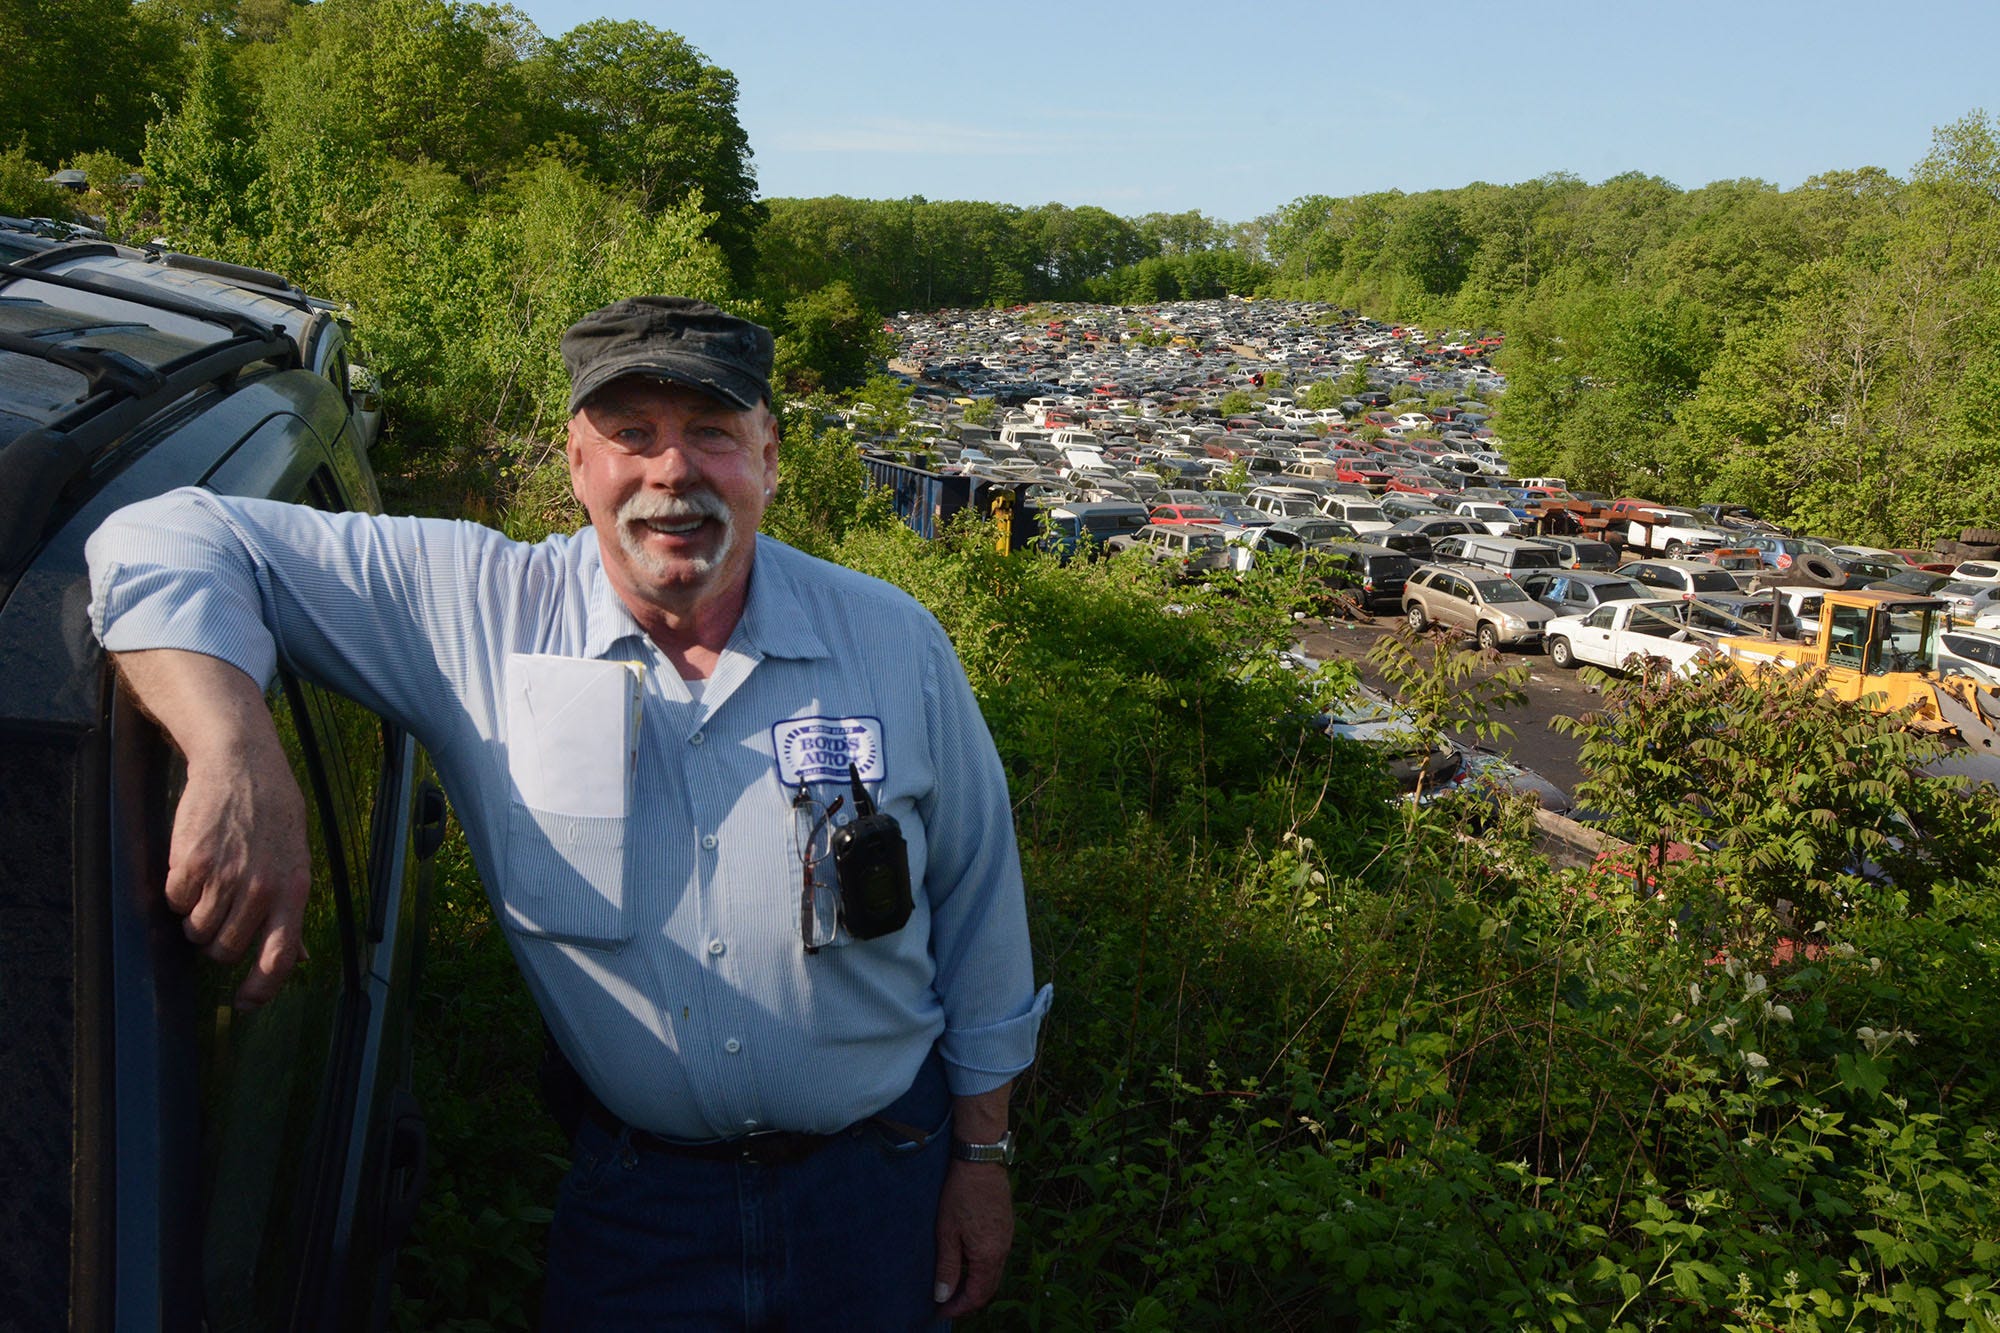 Peter Valin says he has approximately 3,000 cars stored at his business, Boyd's Used Auto Parts in Norwich. [John Shishmanian/ NorwichBulletin.com]